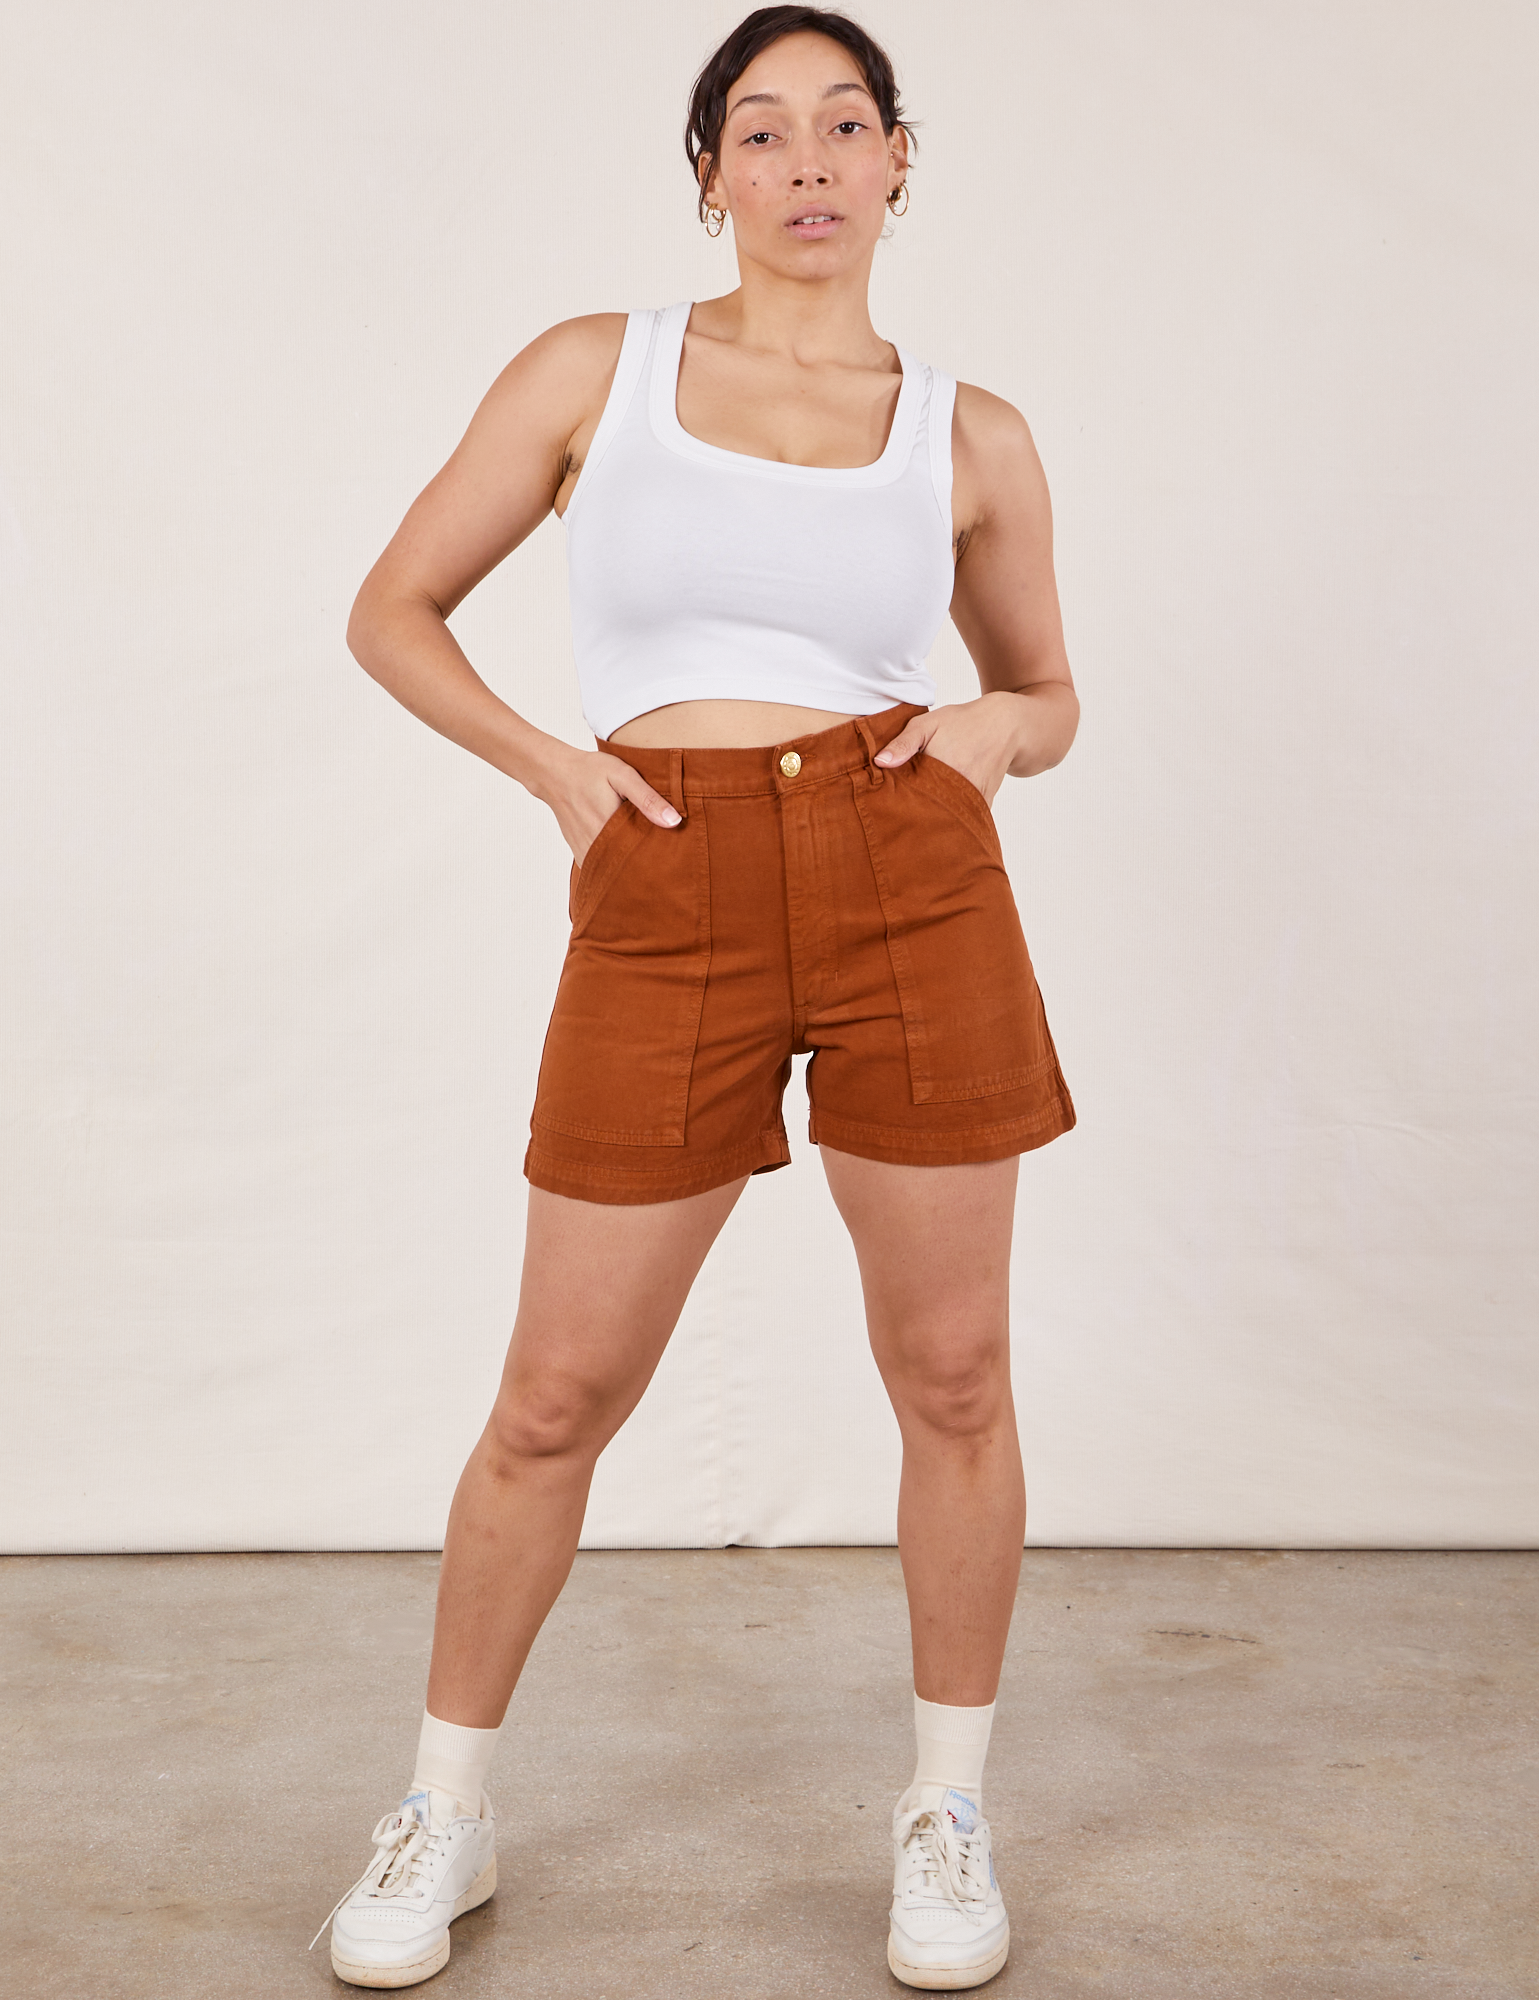 Tiara is 5’4” and wearing S Classic Work Shorts in Burnt Terracotta paired with Cropped Tank Top in vintage tee off-white